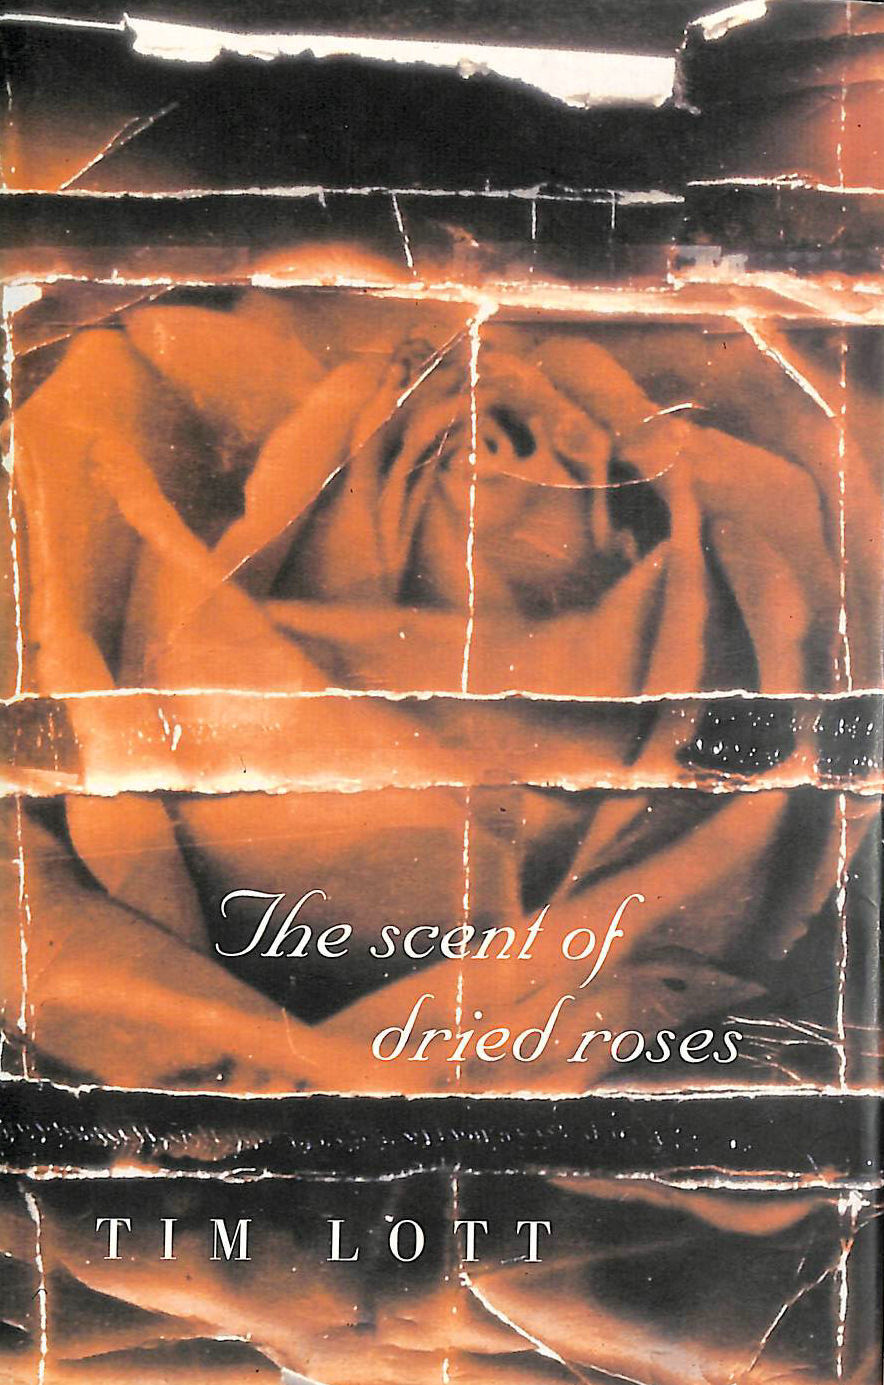 LOTT, TIM - The Scent of Dried Roses